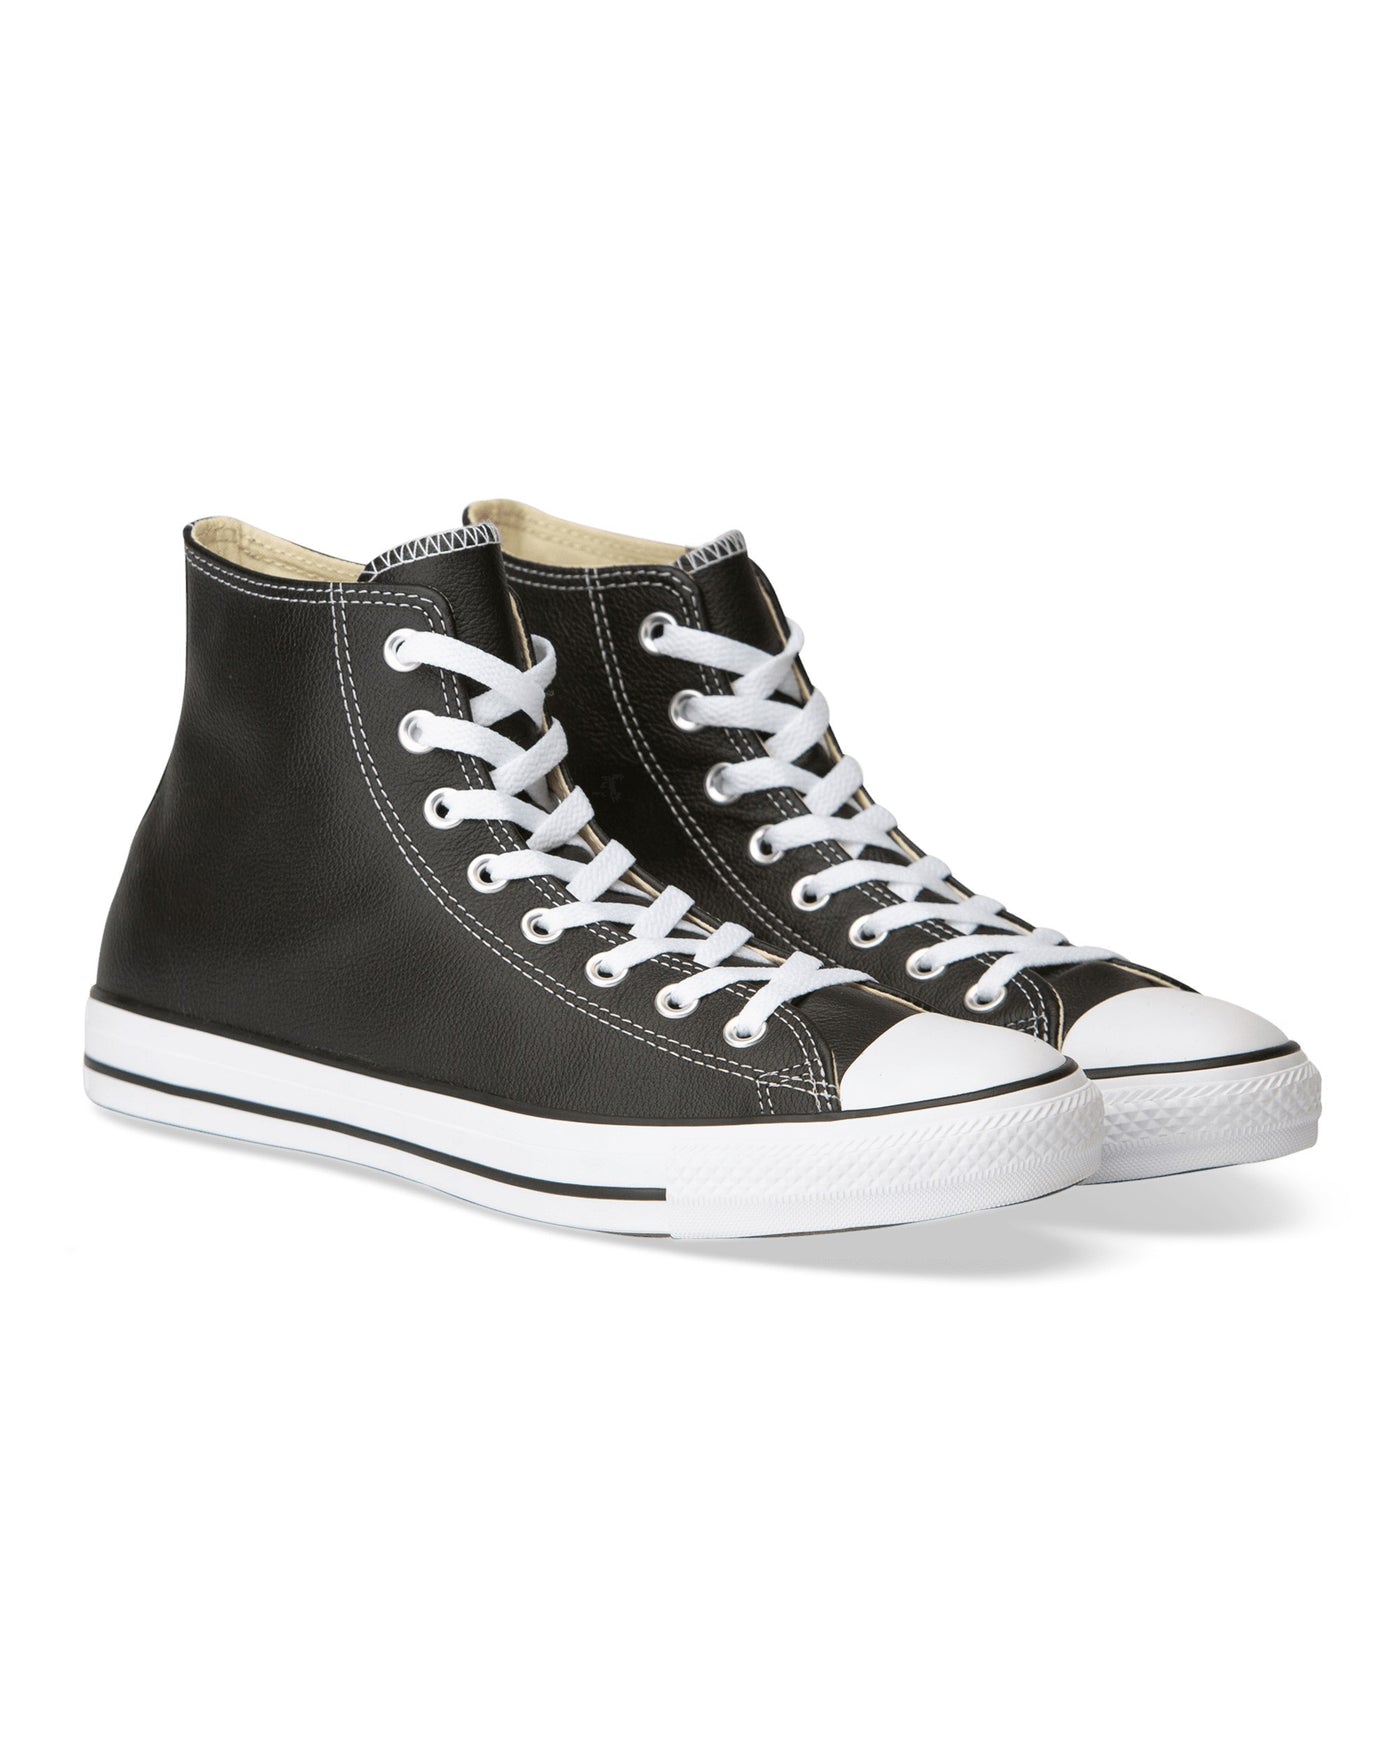 Converse Chuck Taylor Leather High Top Black/White